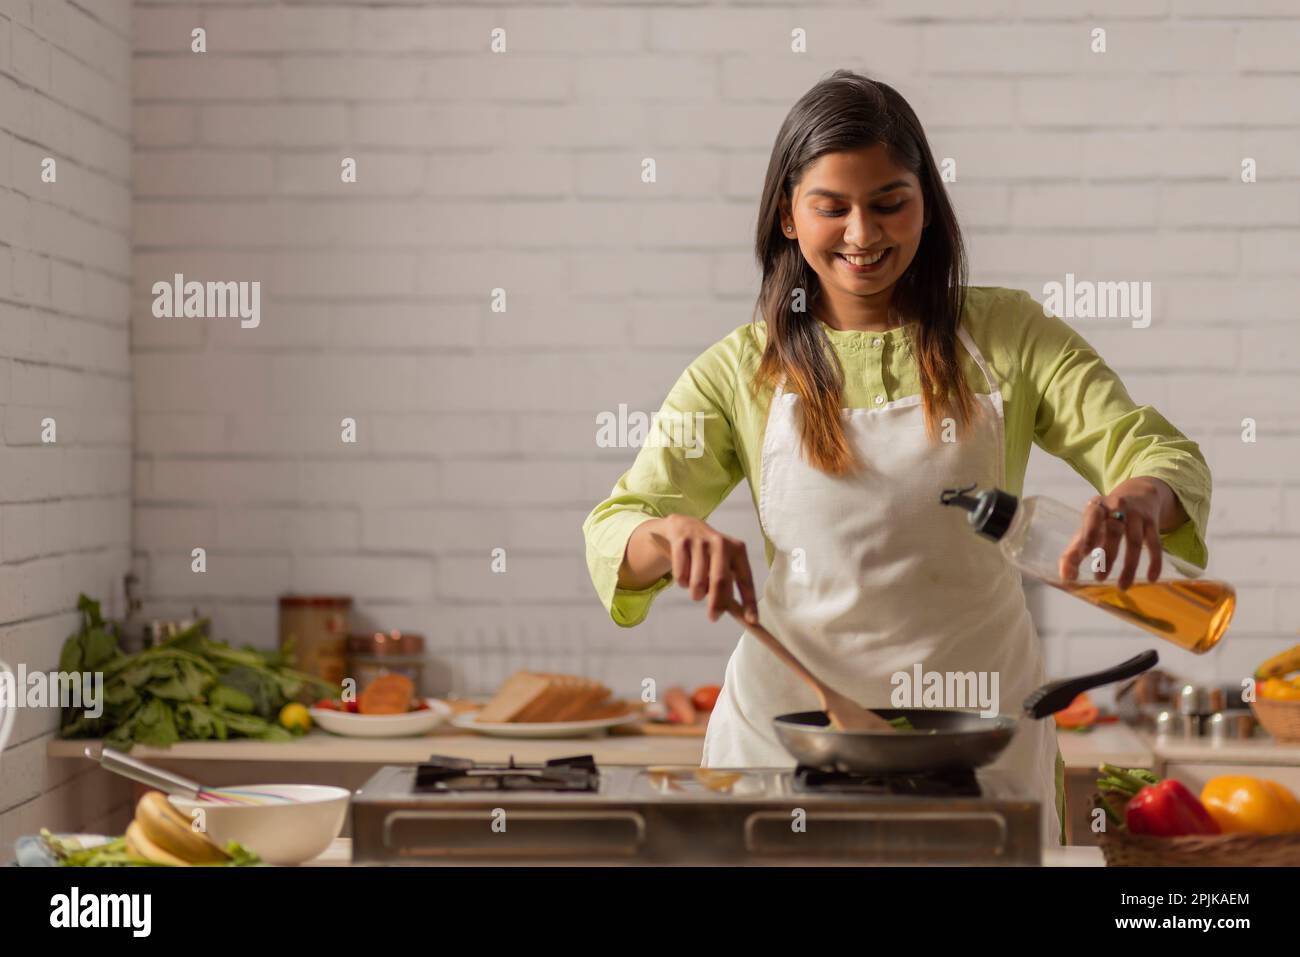 Portrait of cheerful woman cooking in kitchen Stock Photo